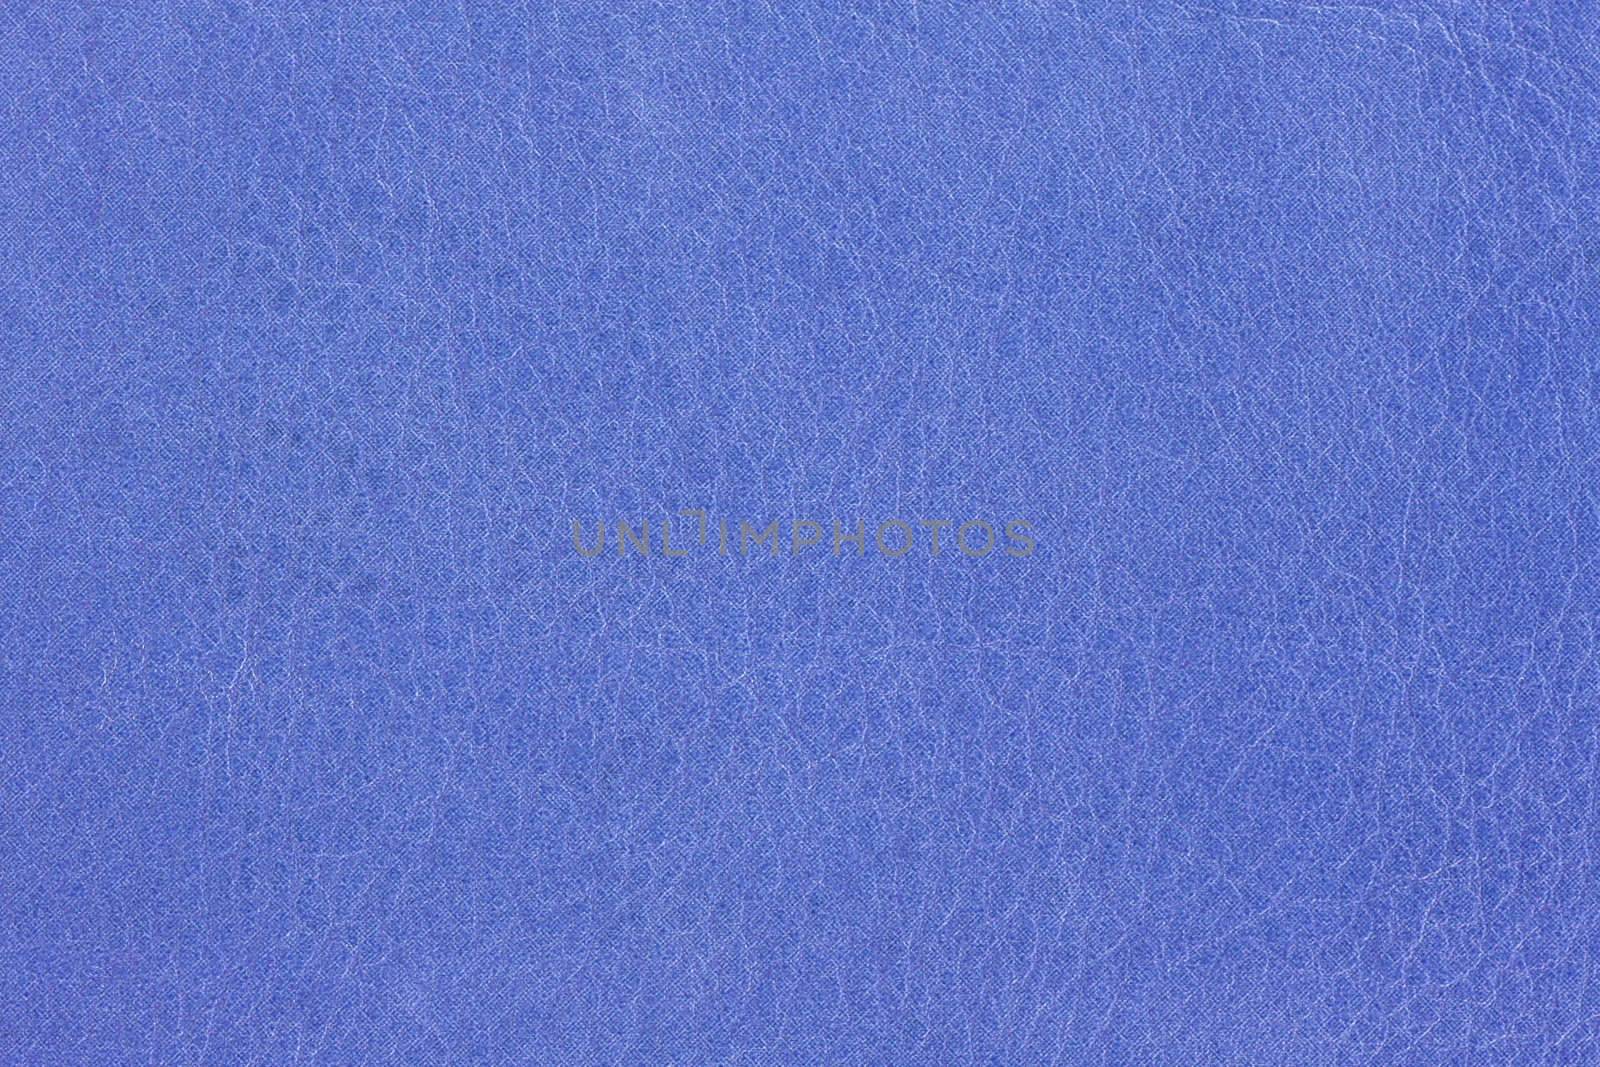 Azure leather texture